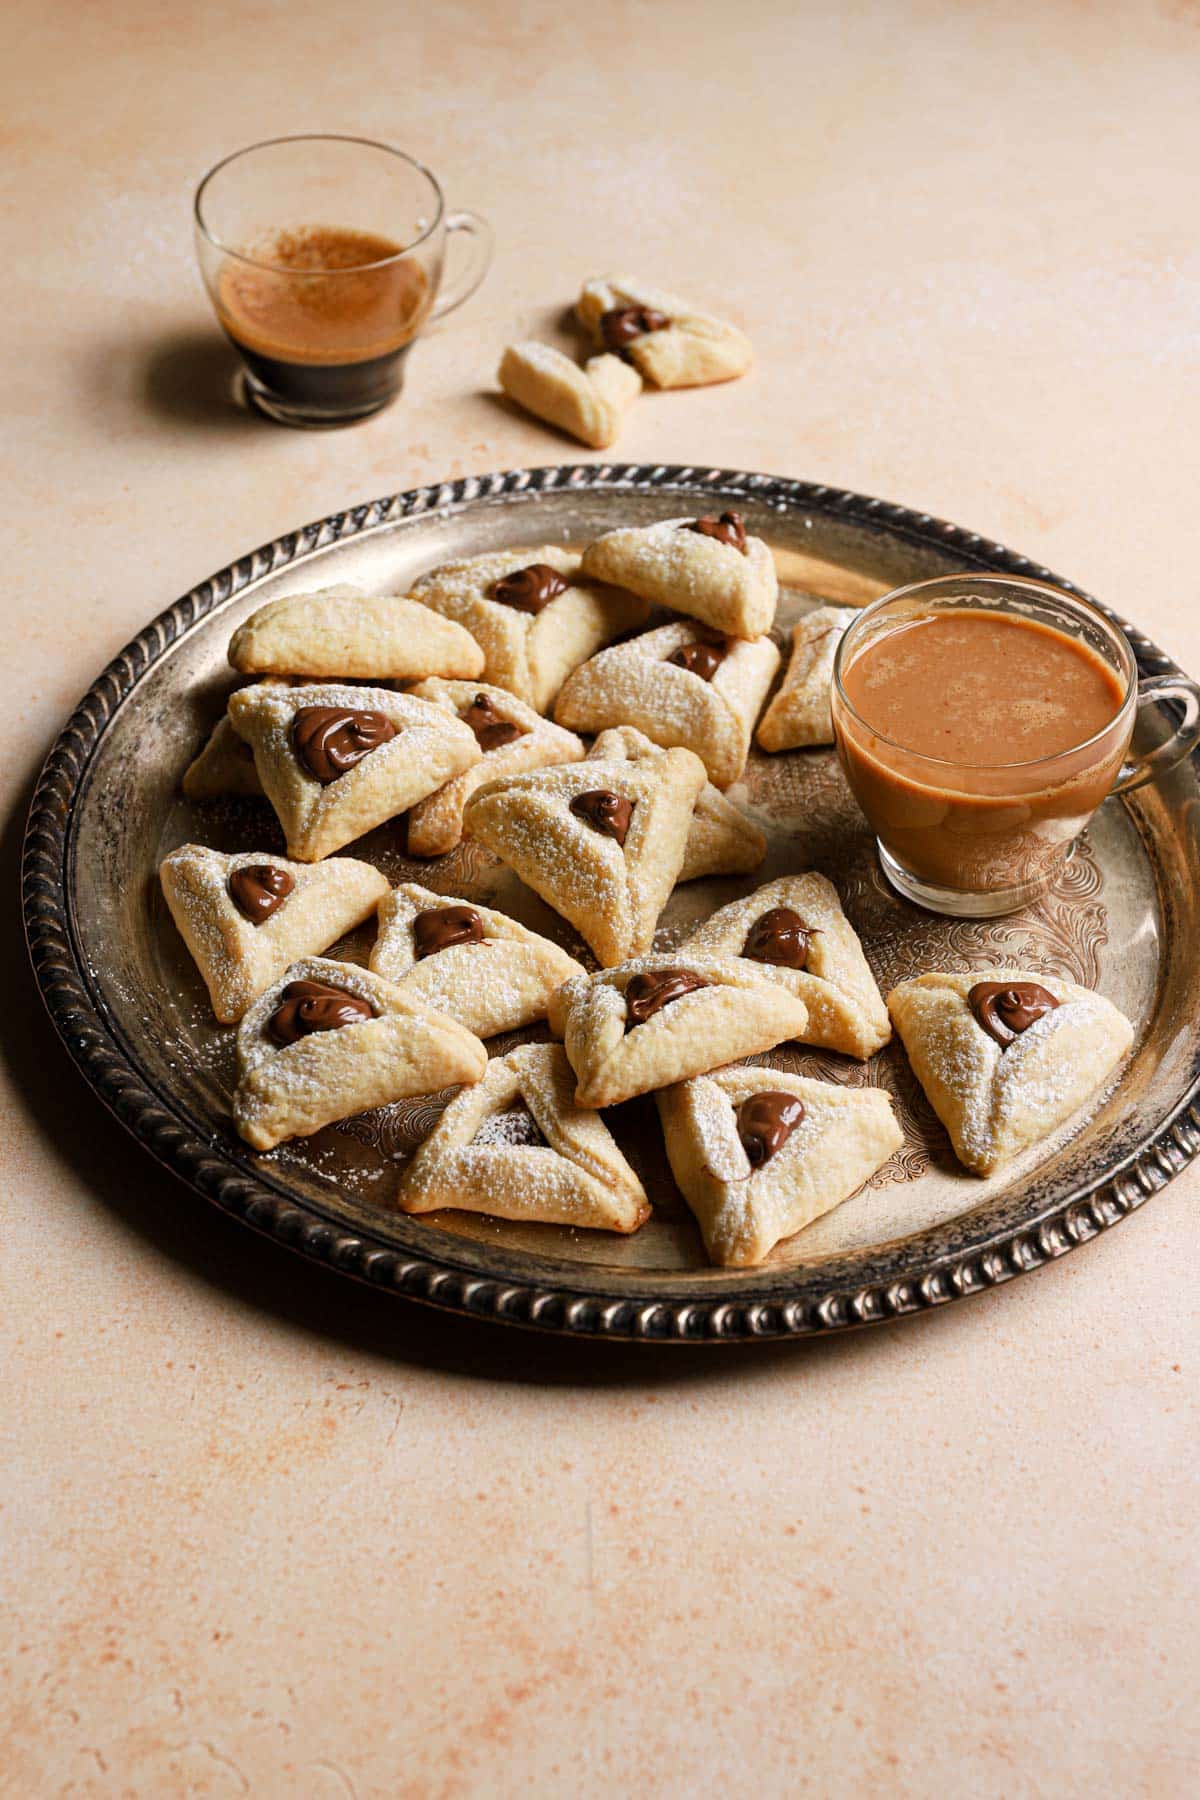 Finished Hamantaschen cookies with dipping sauce.